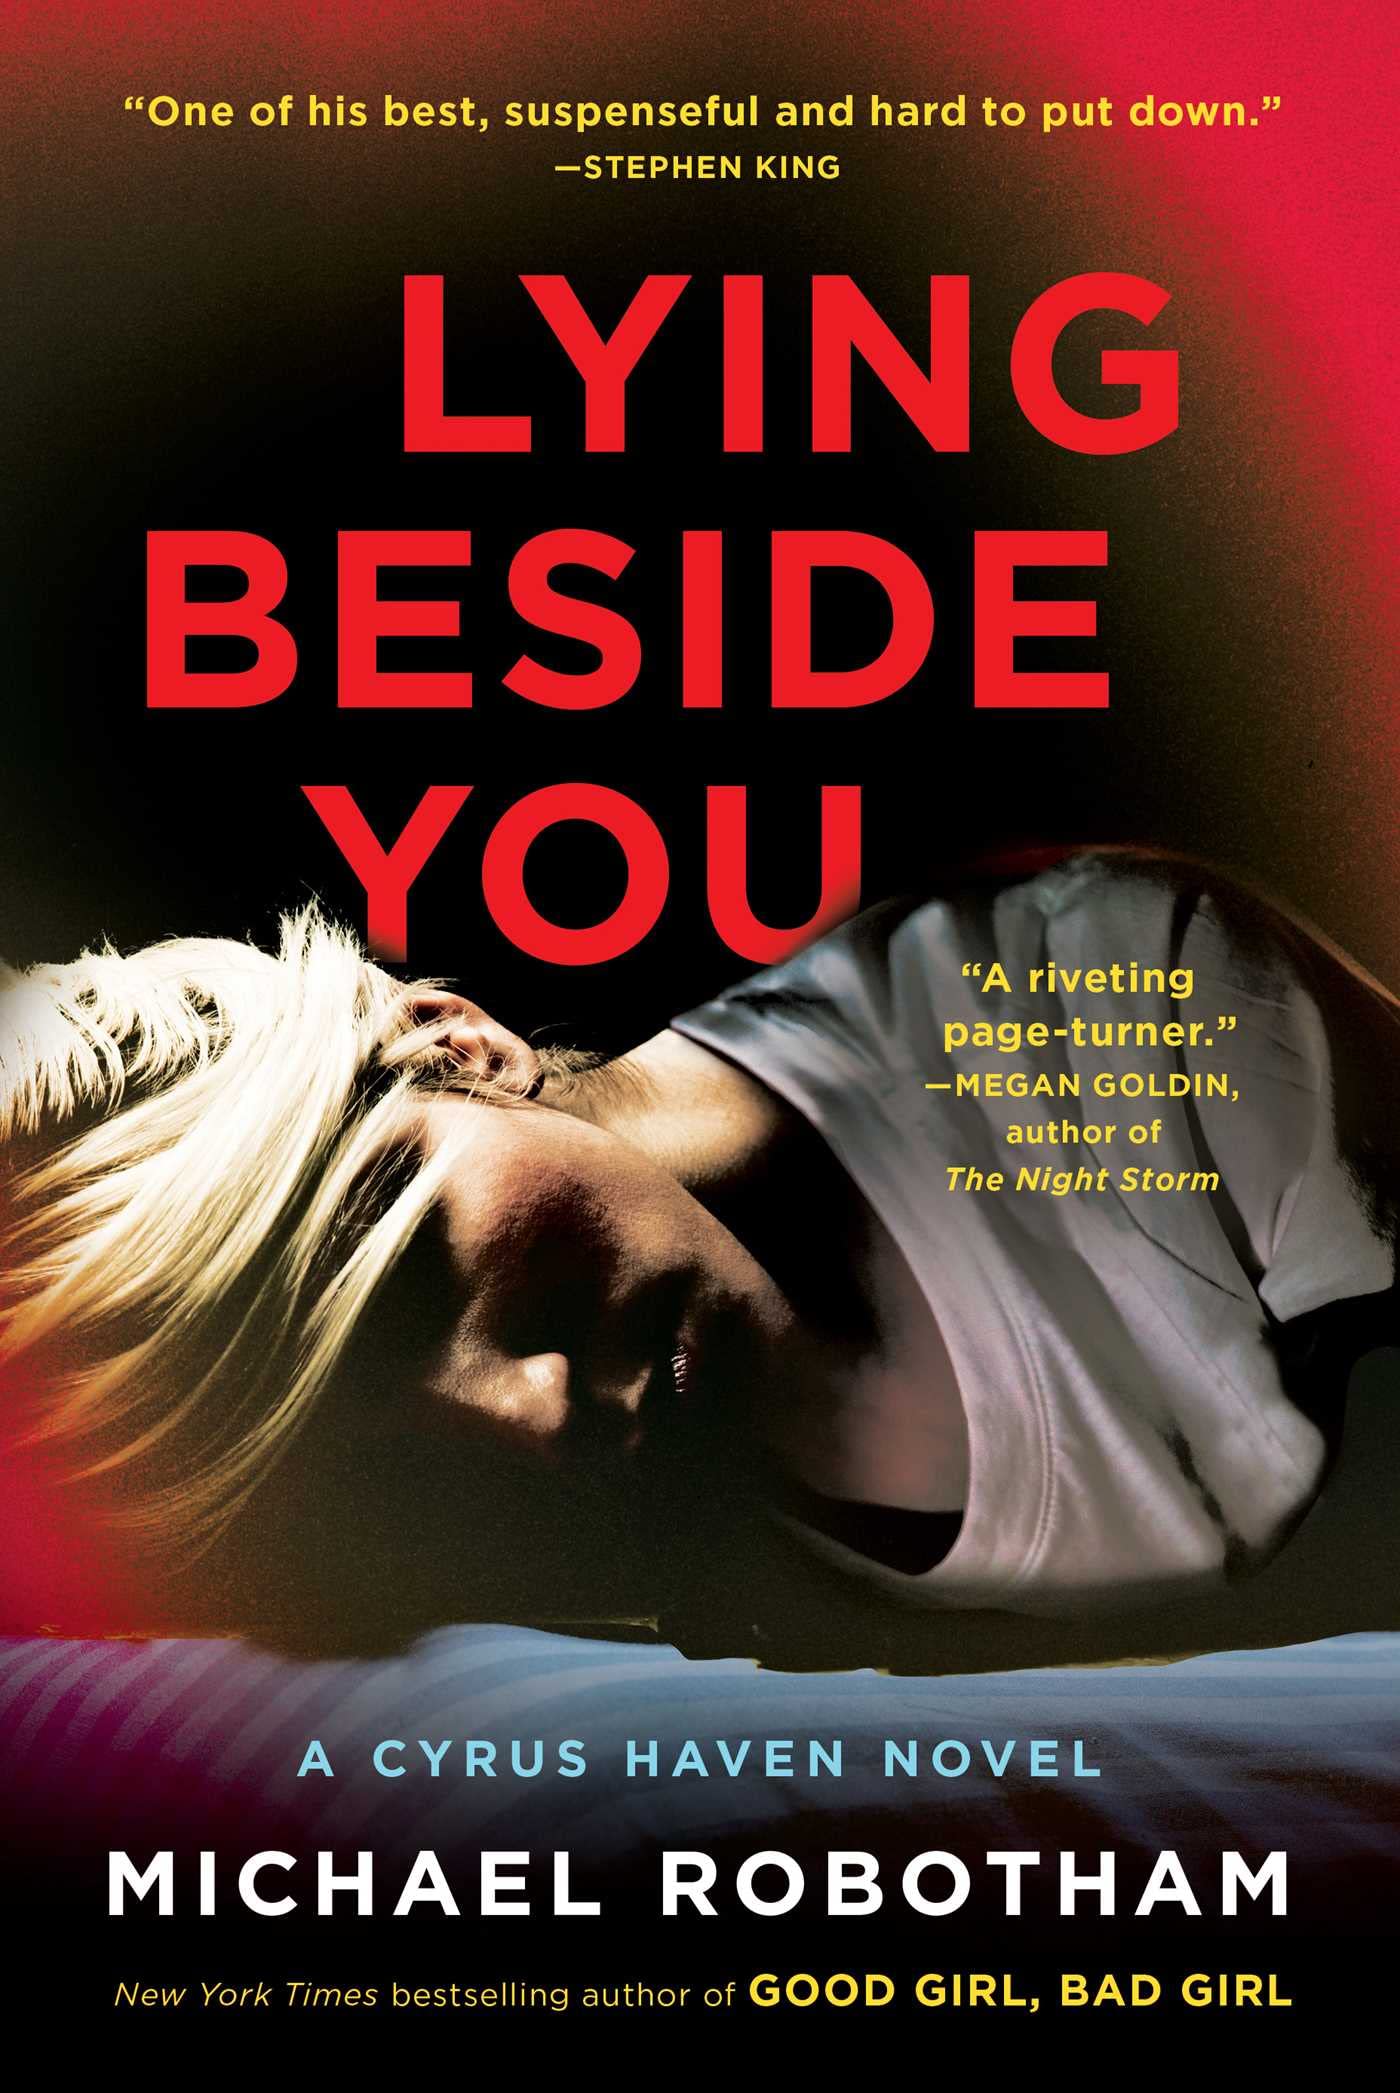 Image for "Lying Beside You"